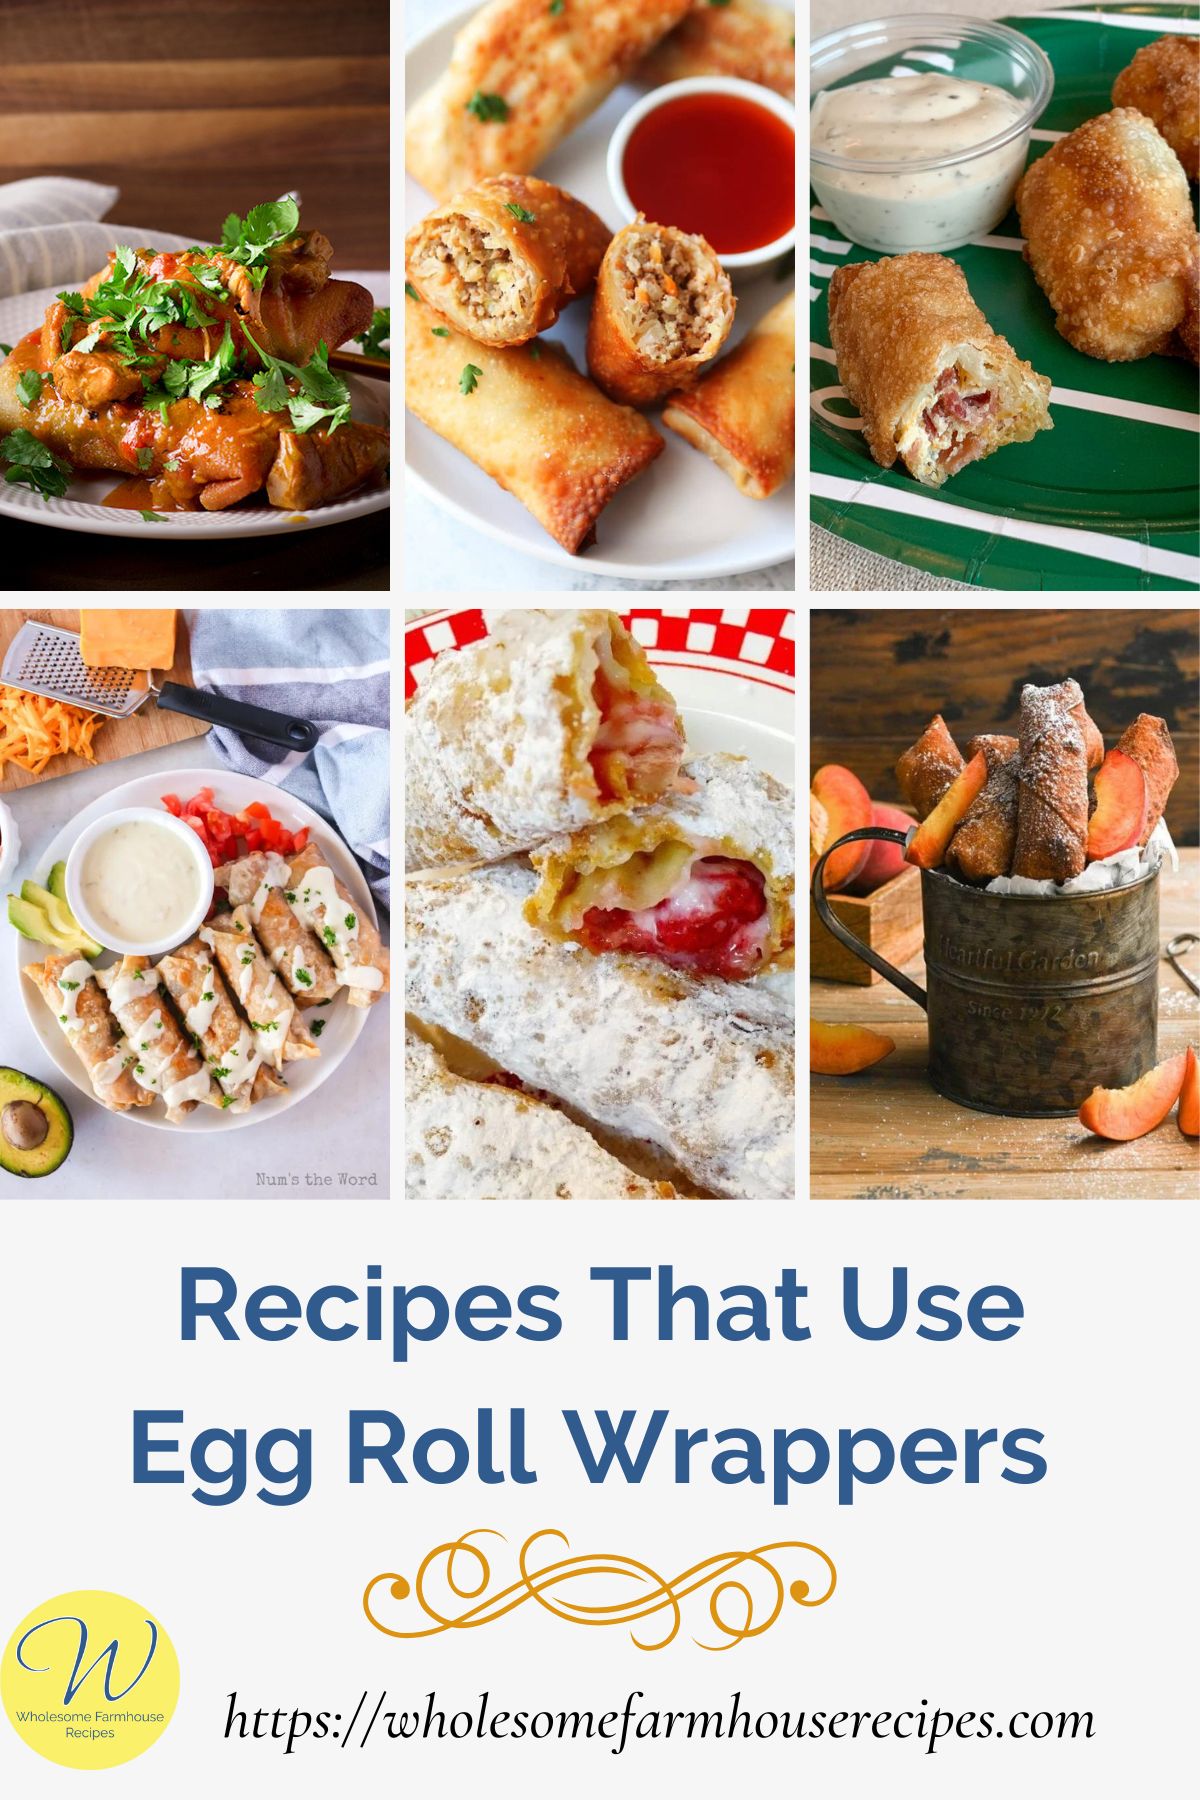 Recipes That Use Egg Roll Wrappers